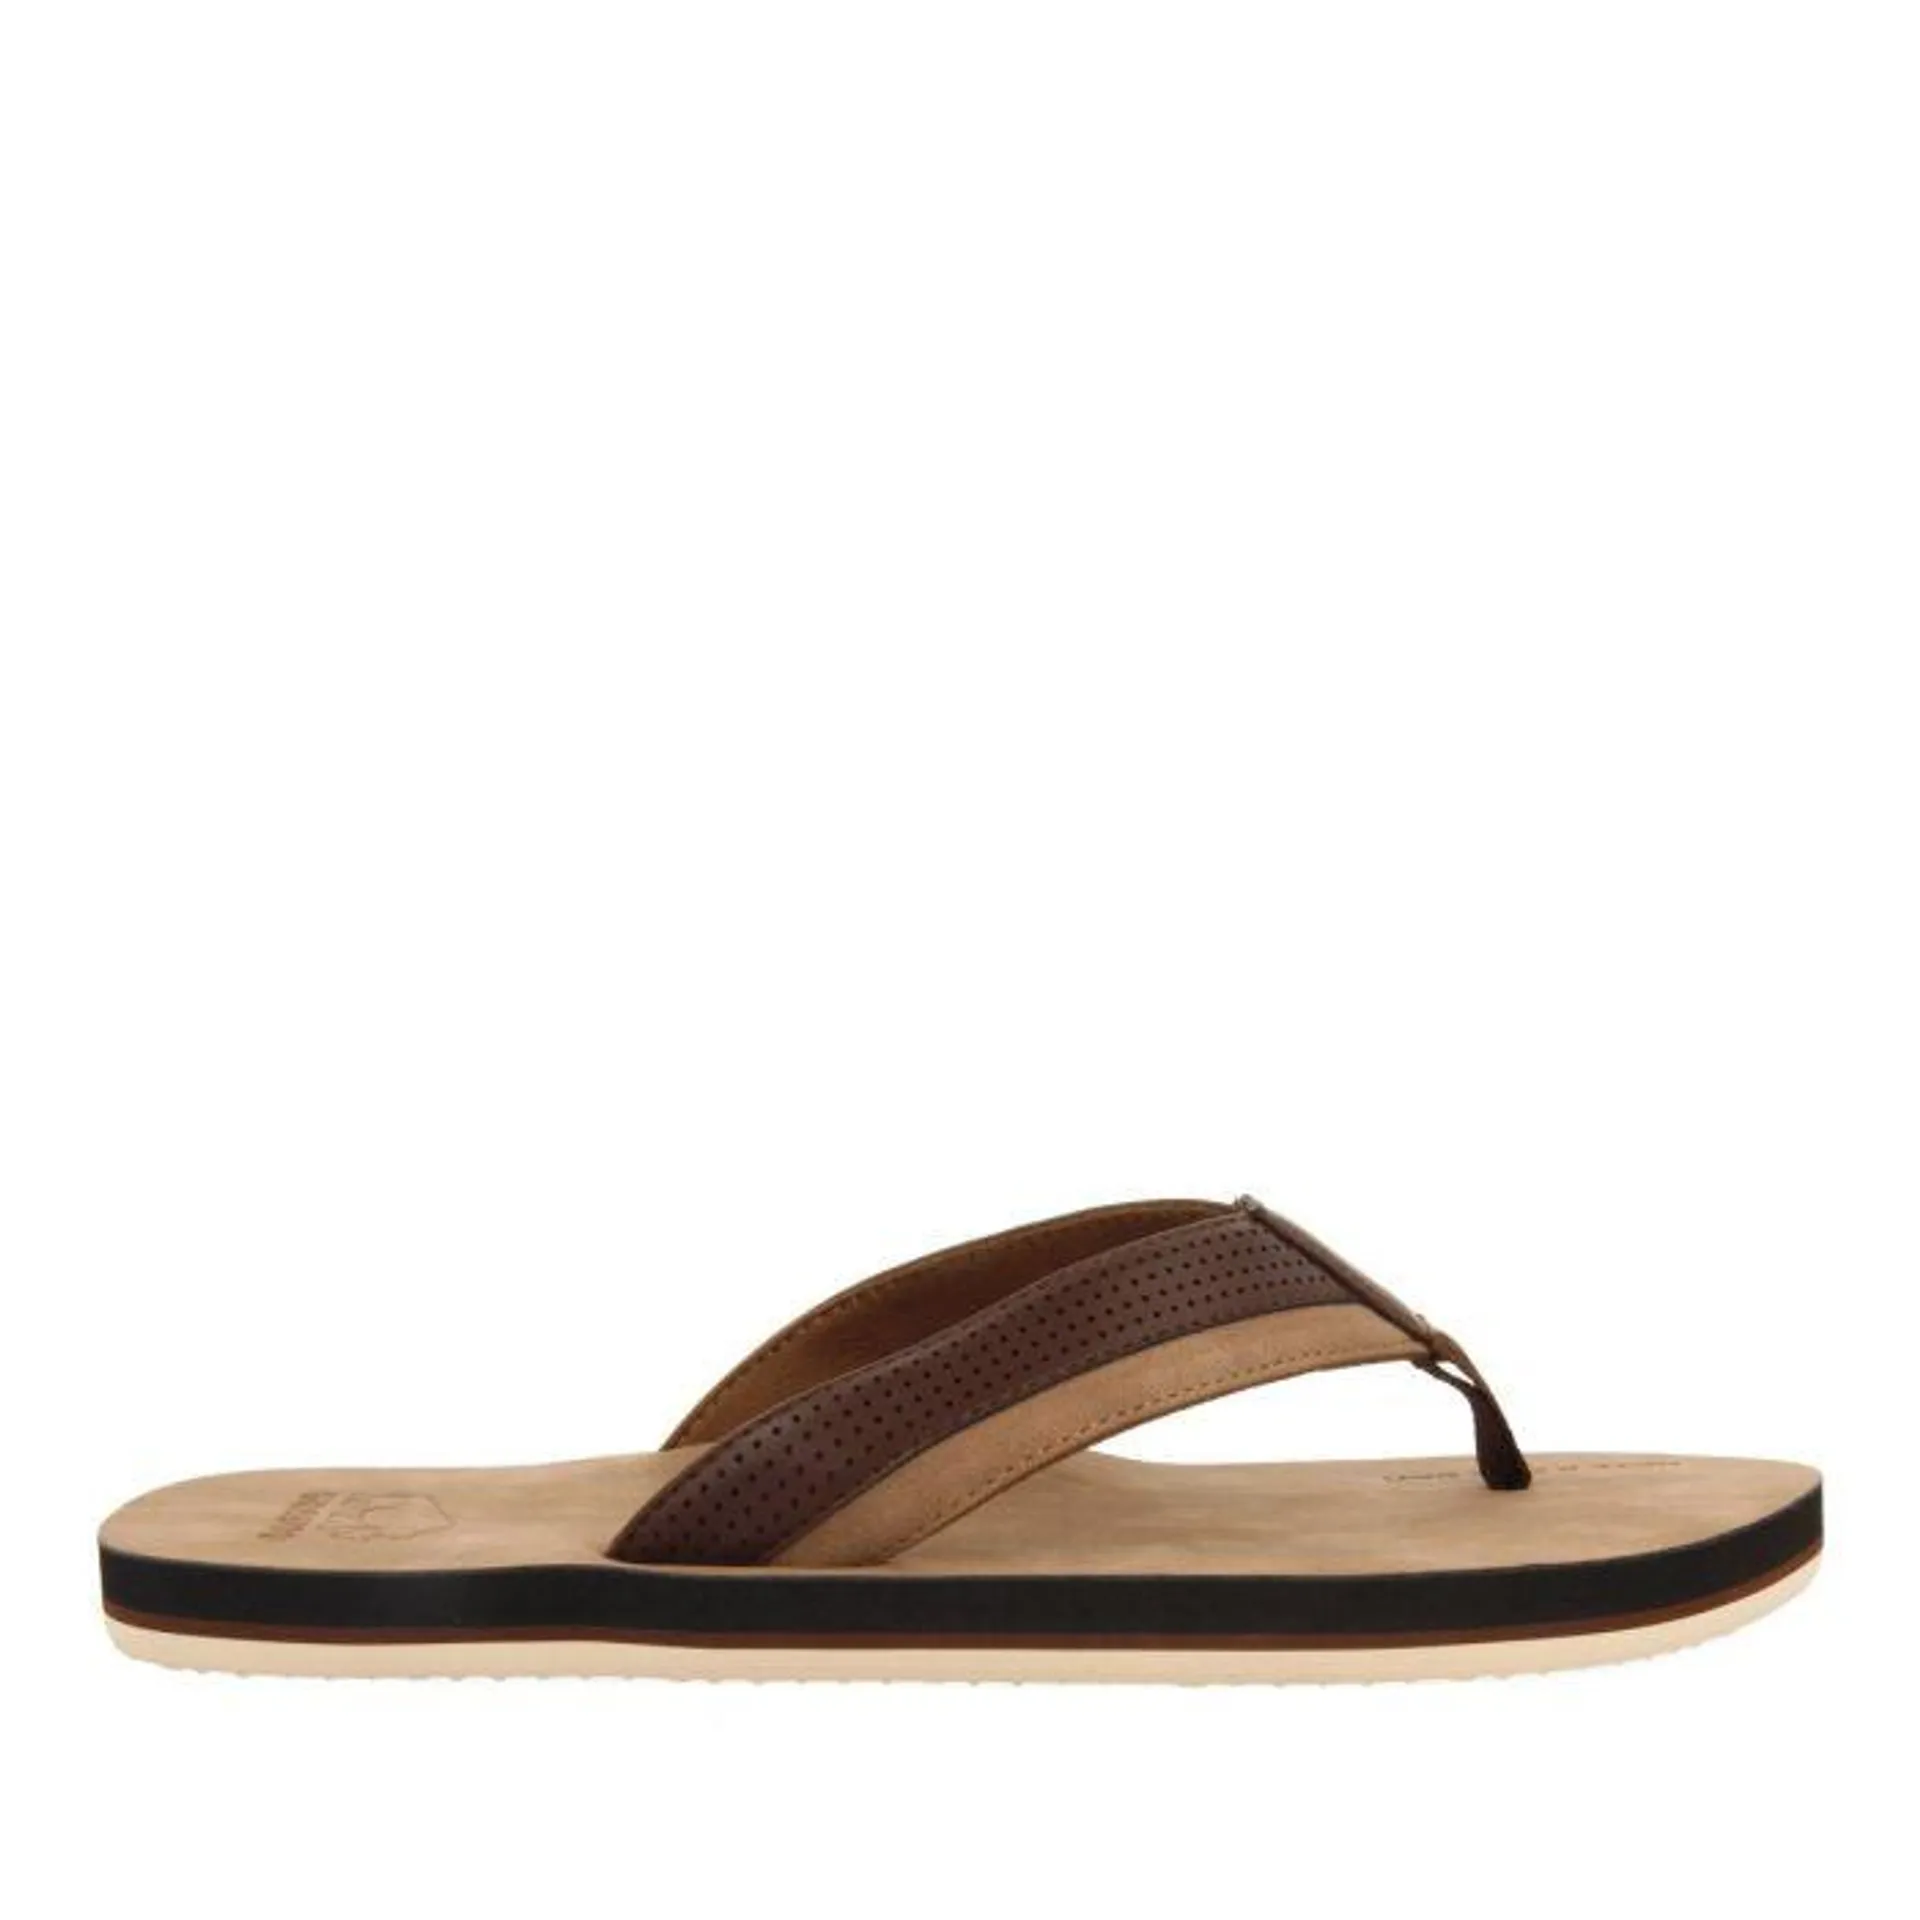 BROWN SANDALS WITH BICOLOR CUT FOR MEN BRENT